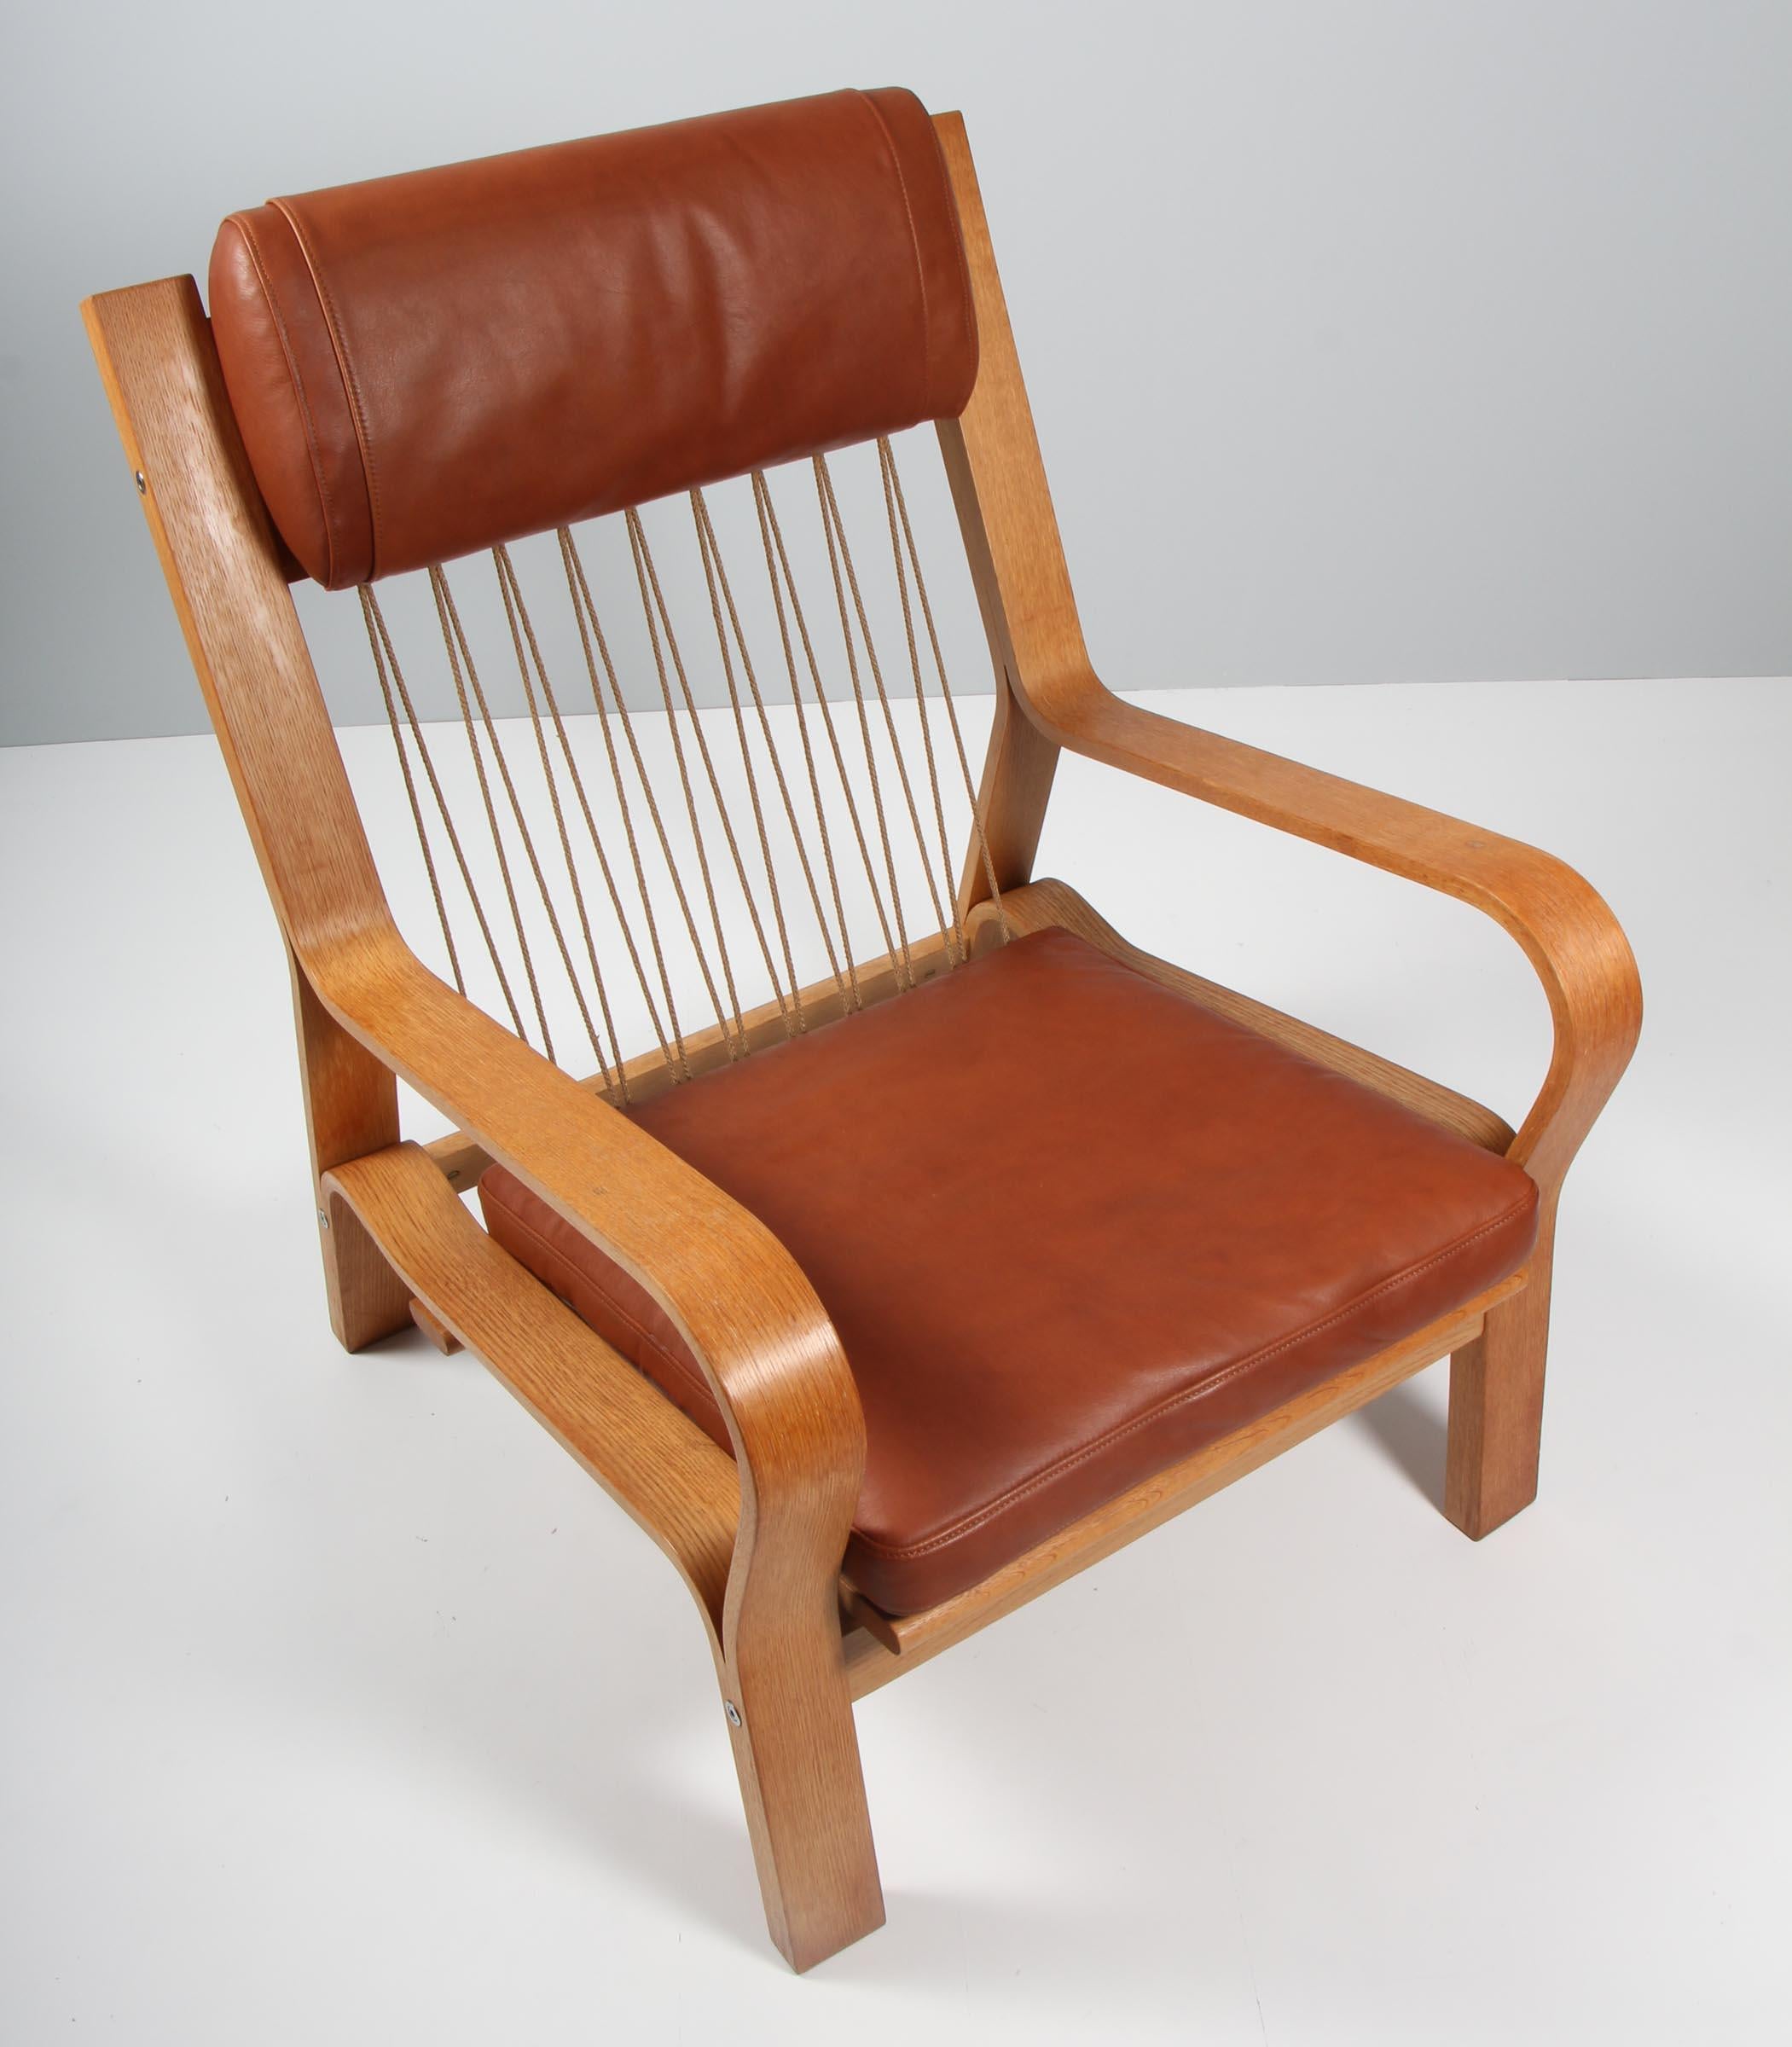 Hans J. Wegner lounge chair made bended oak veener. Cotton cord in back

New upholstered with brandy coloured aniline leather.

Model 671, made by GETAMA.

 